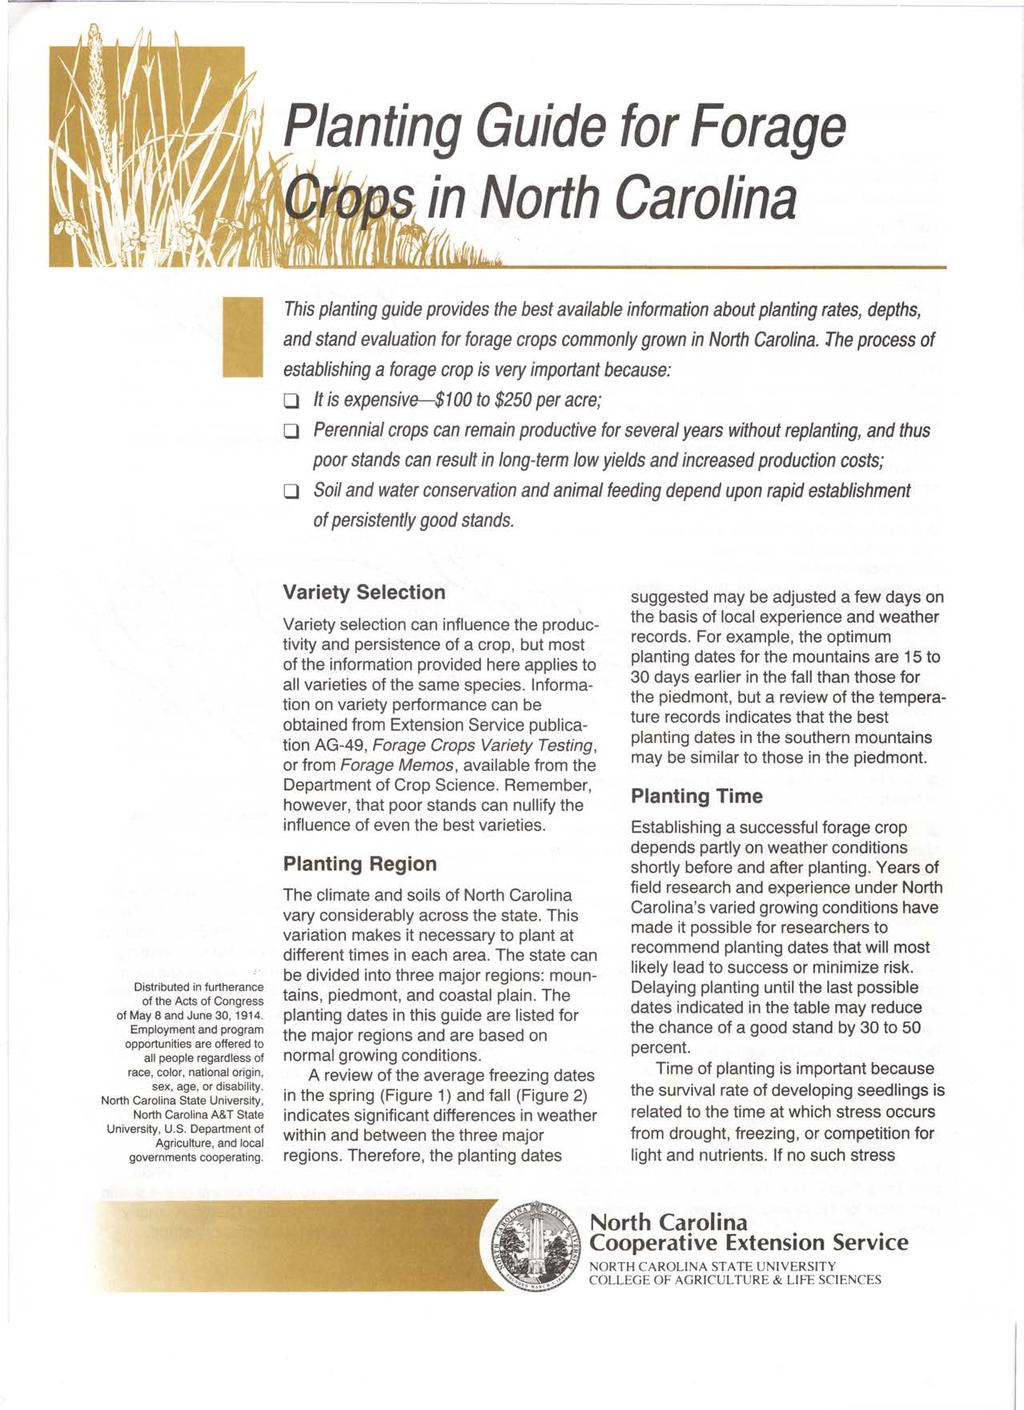 Planting Guide for Forage in North Carolina This planting guide provides the best available information about planting rates, depths, and stand evaluation for forage crops commonly grown in North